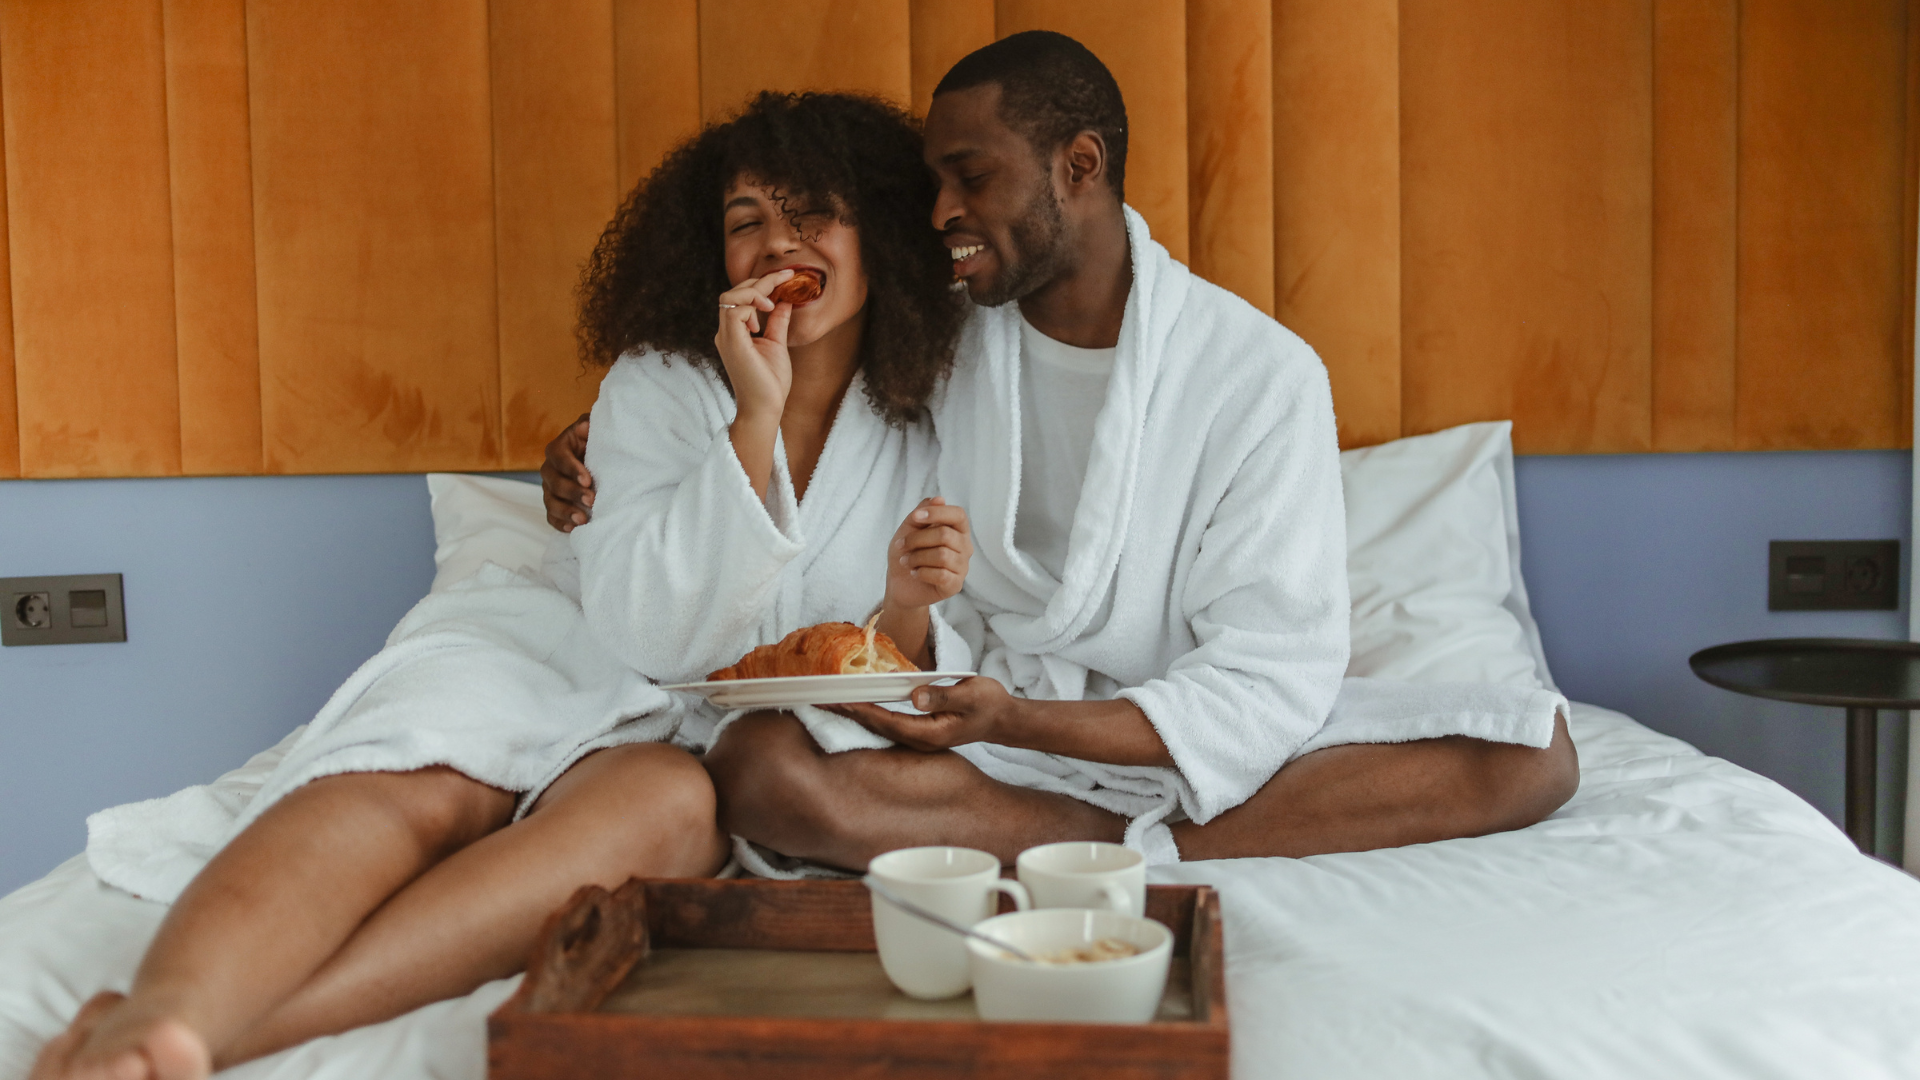 5 foods to help boost your sex life